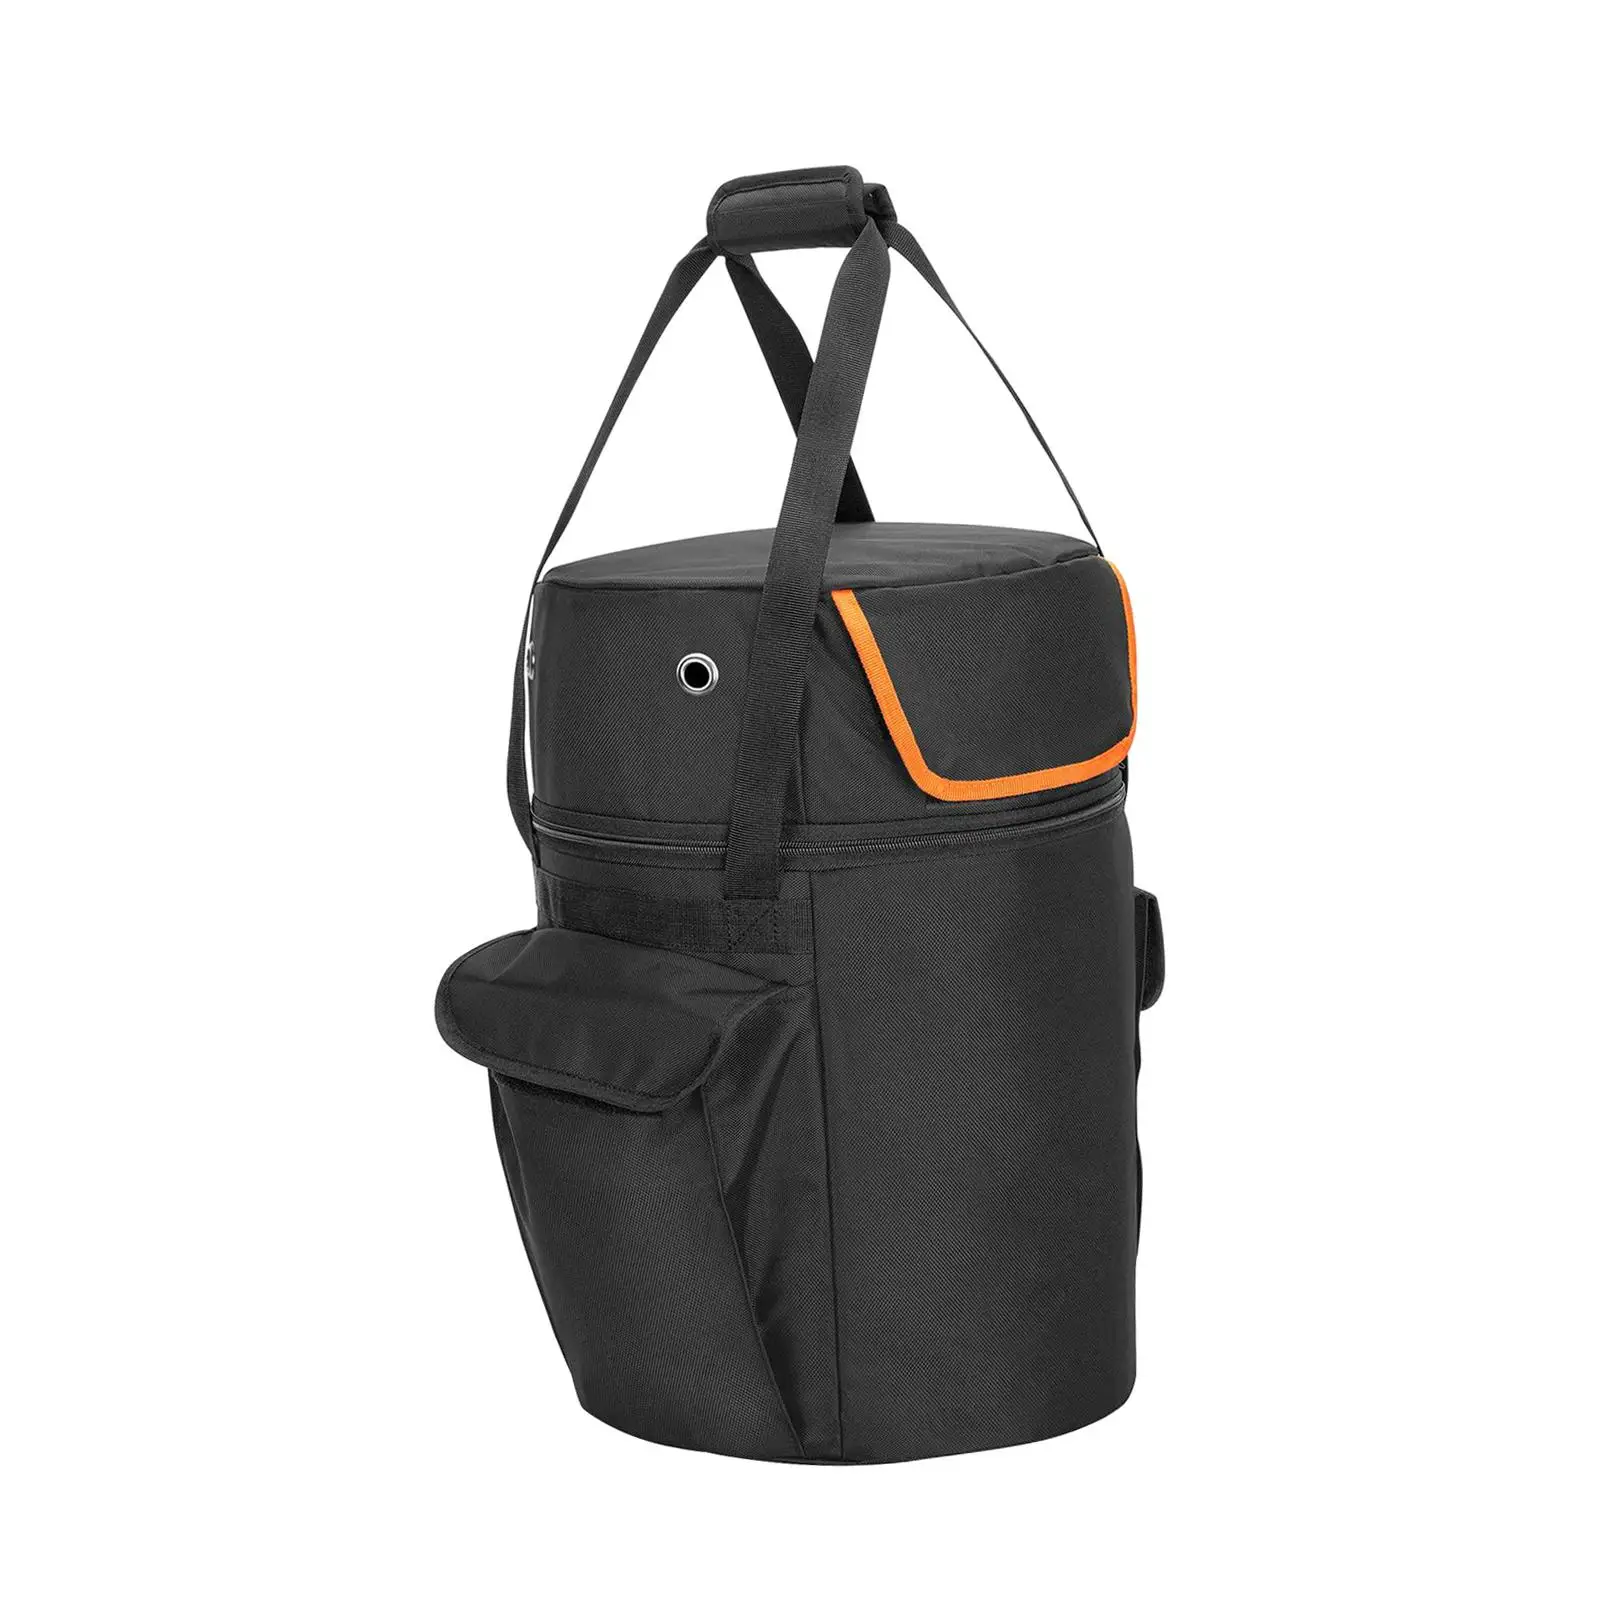 Gas Canister Cover Storage Pocket Protect Pocket Storage Carrier Tank Cylinder Pocket Gas Tank Carrying Bag for Cooking Supplies